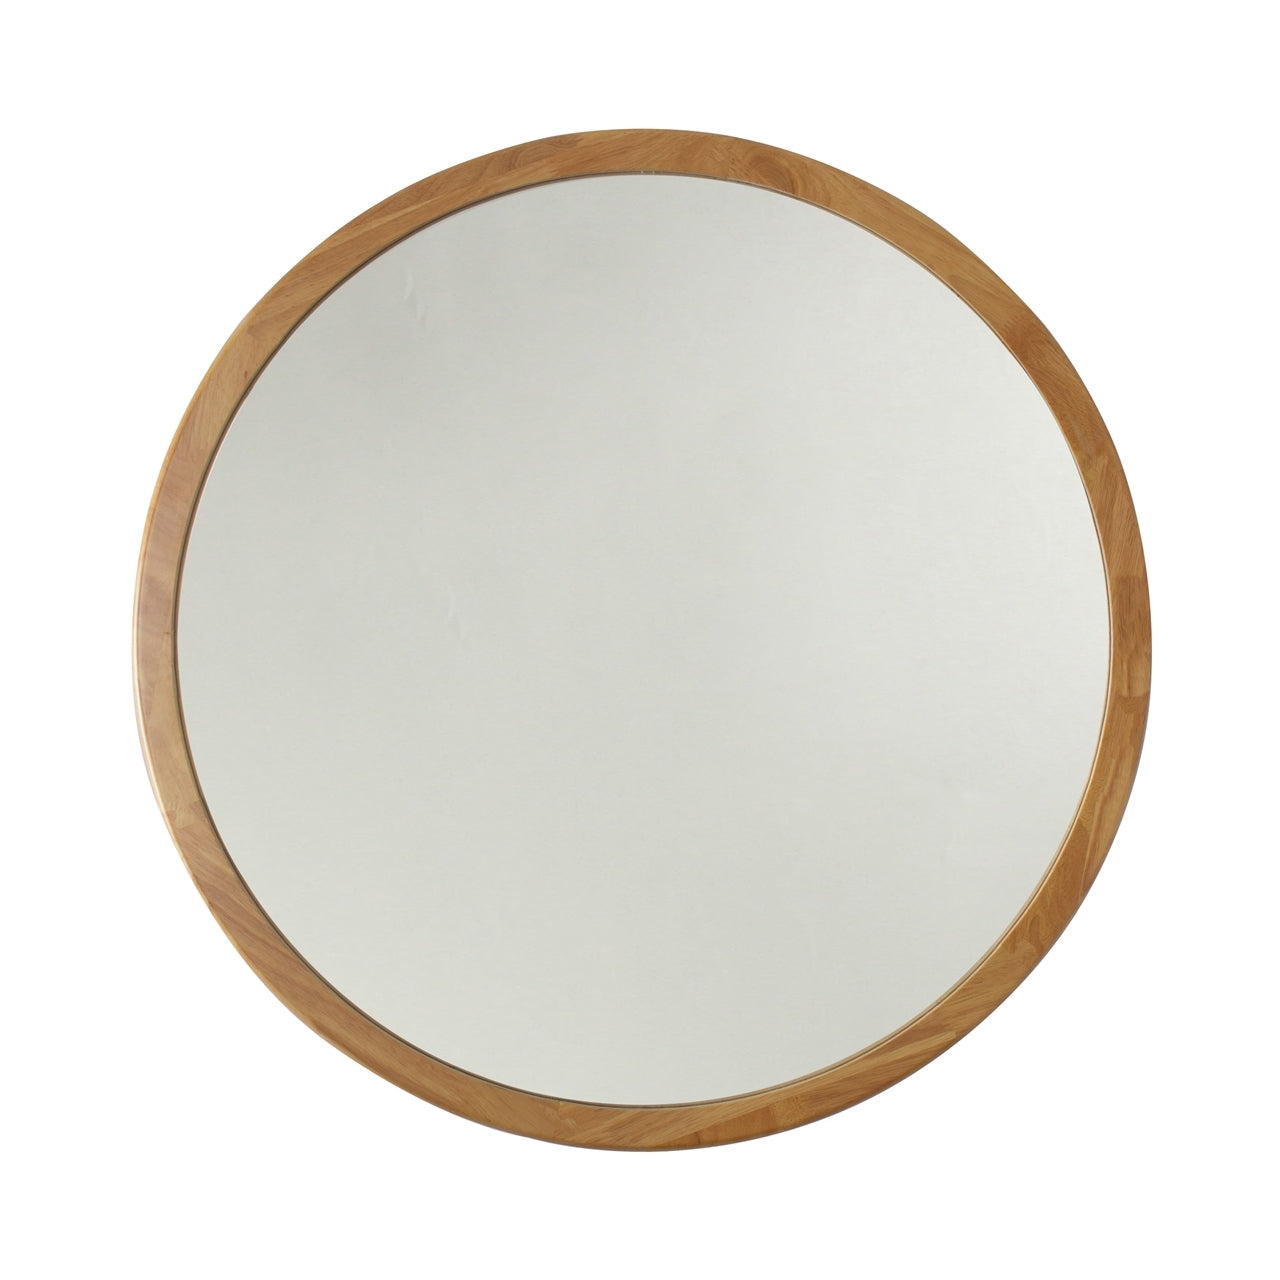 Reflection Maple Finish Framed Wall Mirror 32" Height